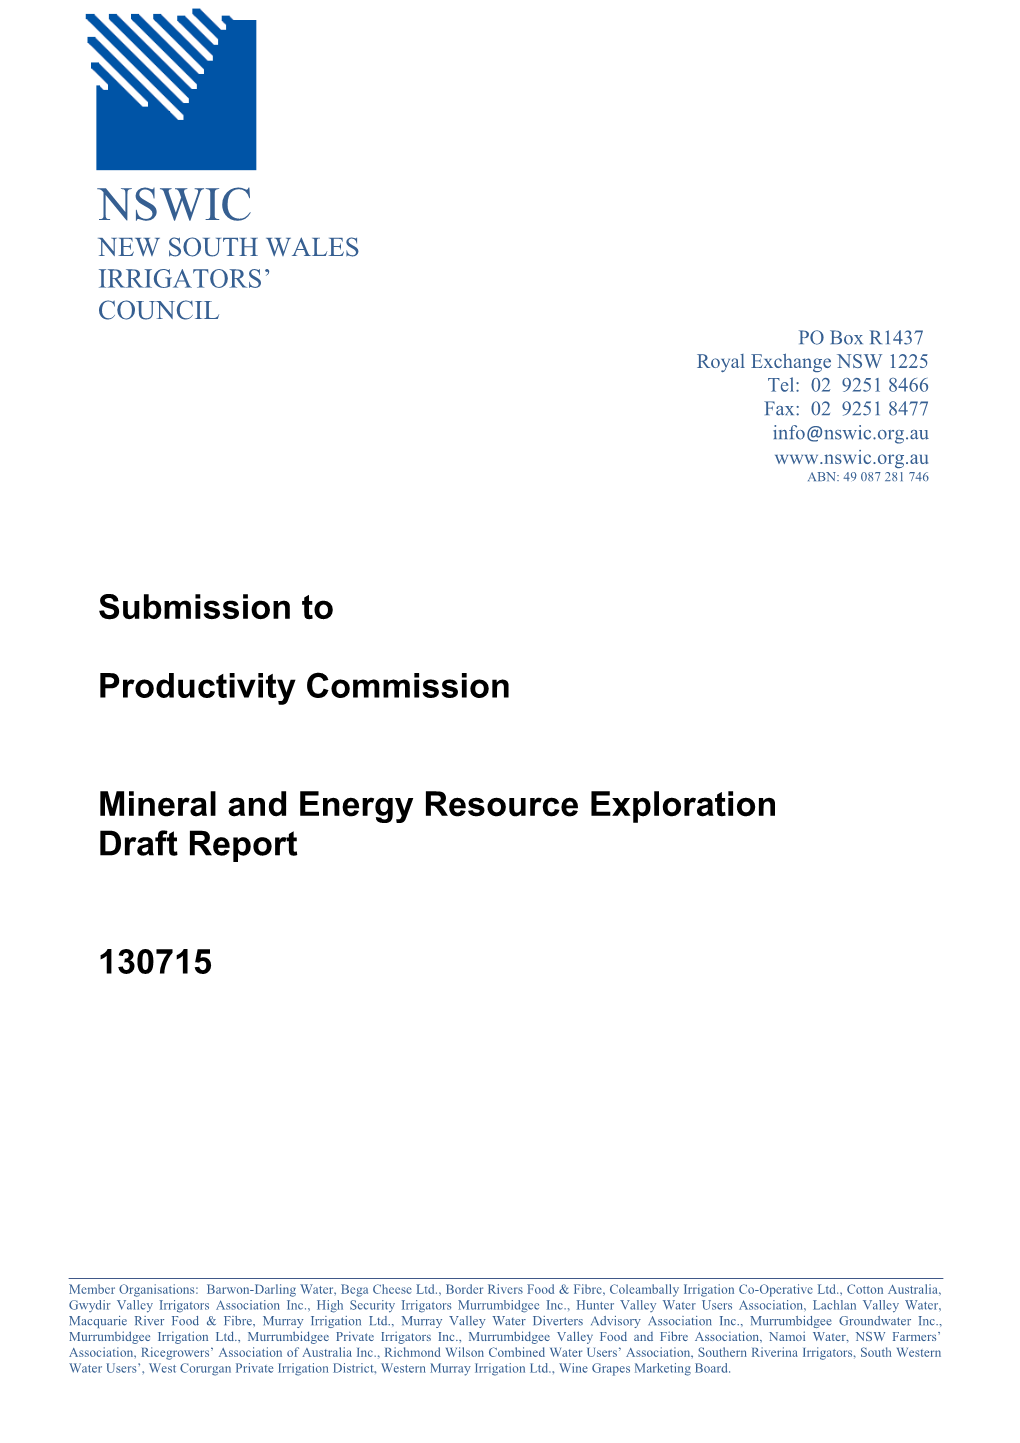 Submission DR50 - NSW Irrigators' Council - Mineral and Energy Resouce Exploration - Public